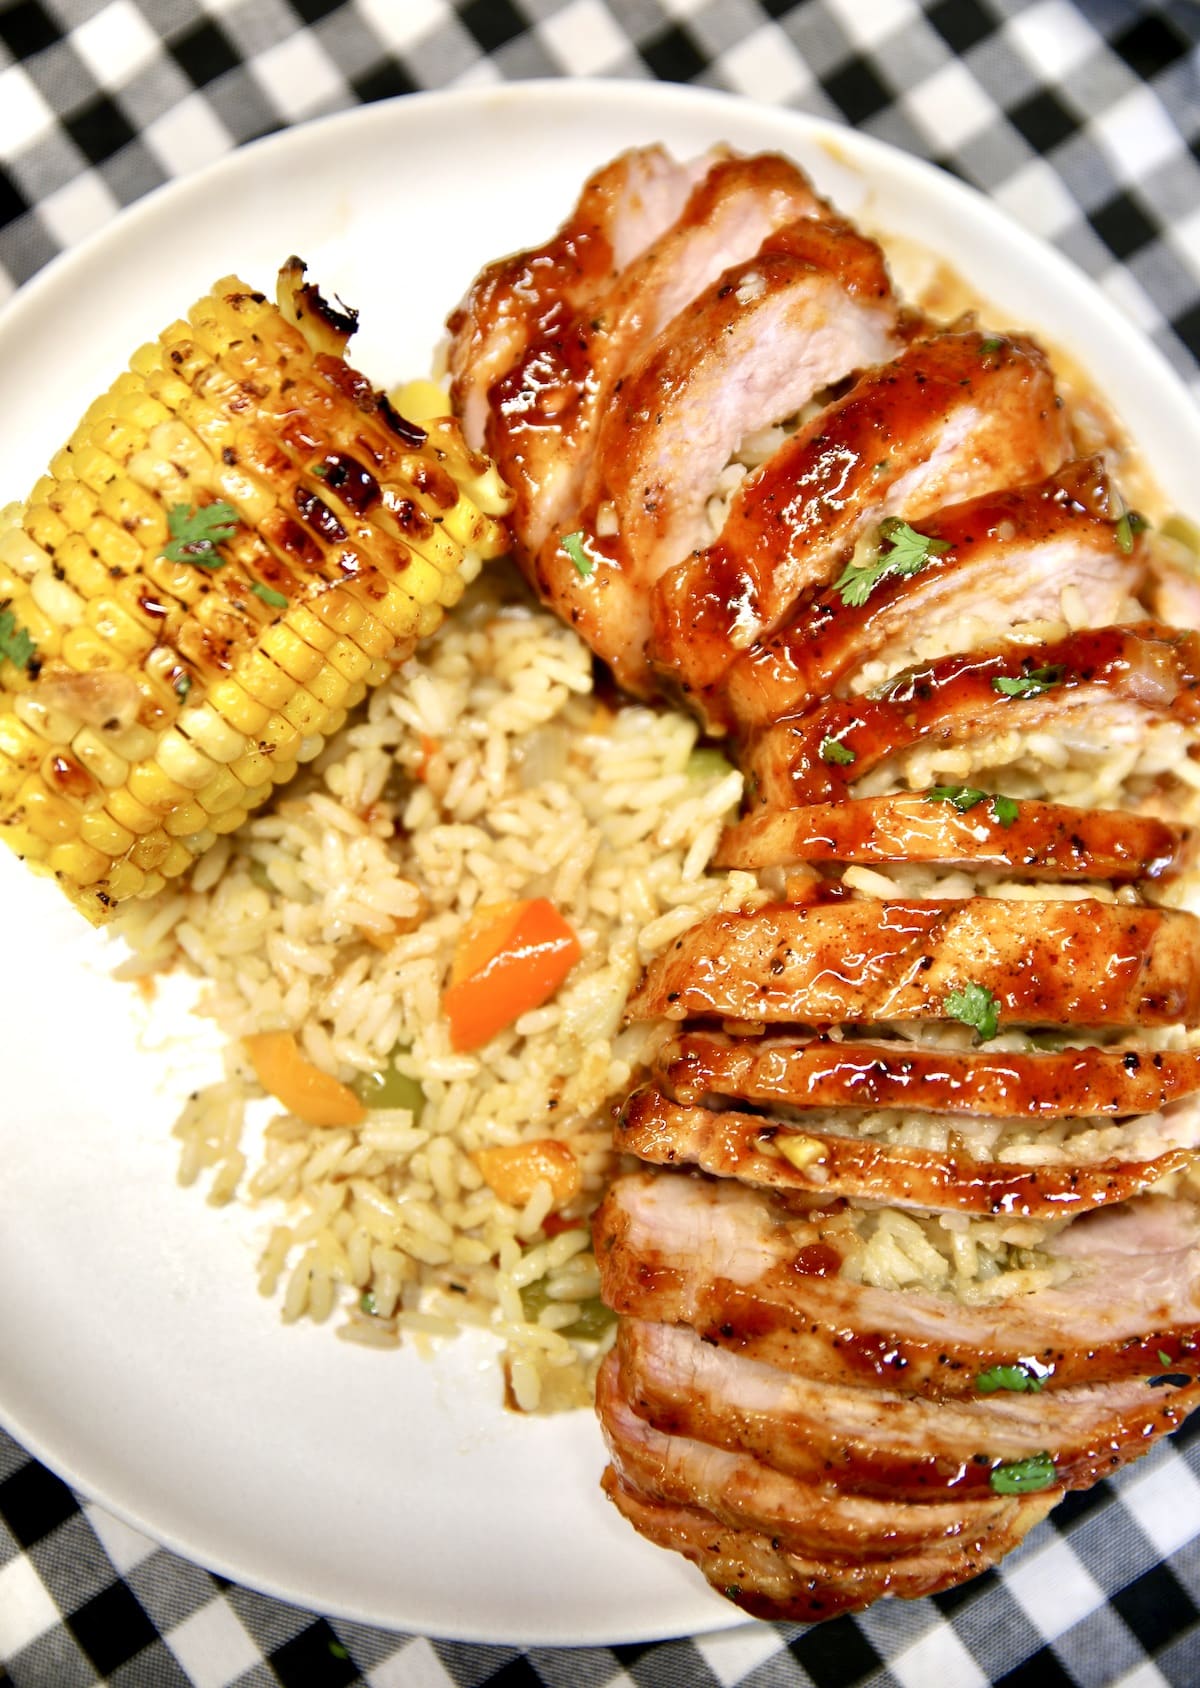 Plate with bbq sliced pork chop with rice and corn.